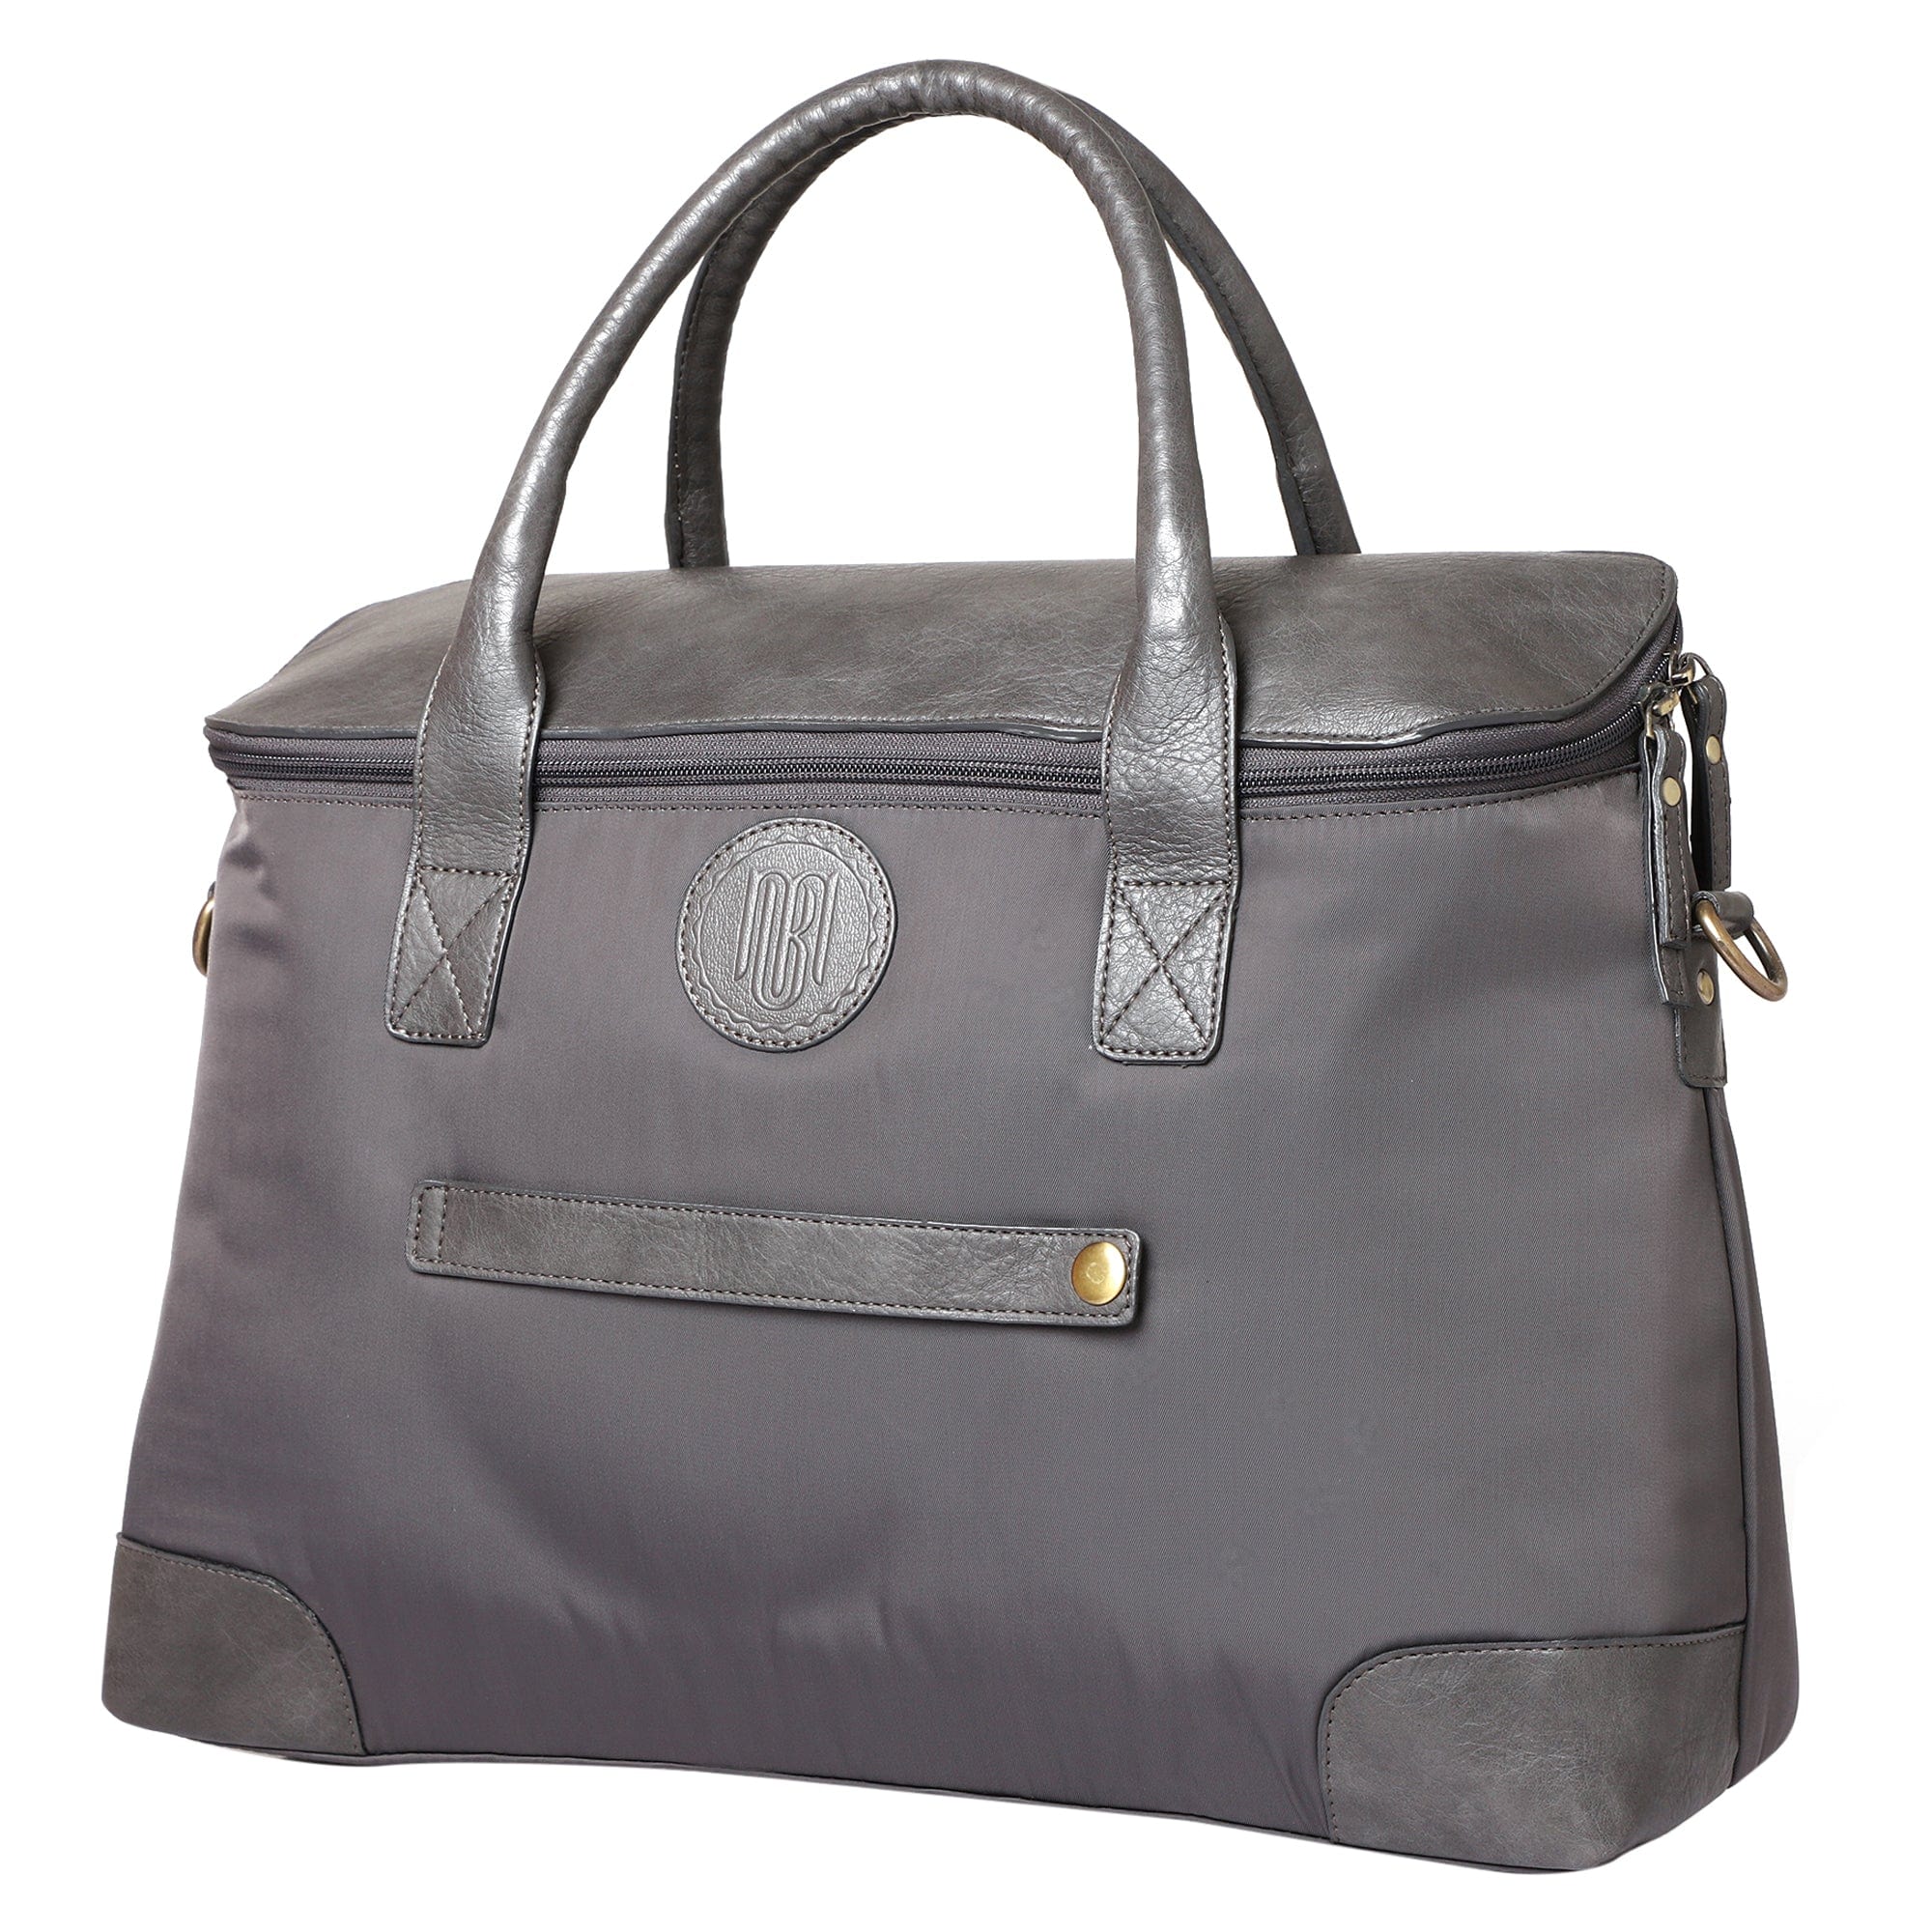 Mona B Unisex Messenger | Small Overnighter Bag for upto 14" Laptop/Mac Book/Tablet with Stylish Design: Ohio Magnet - RP-306 MGT - Overnighter by Mona-B - Backpack, Flash Sale, Sale, Shop2999, Shop3999